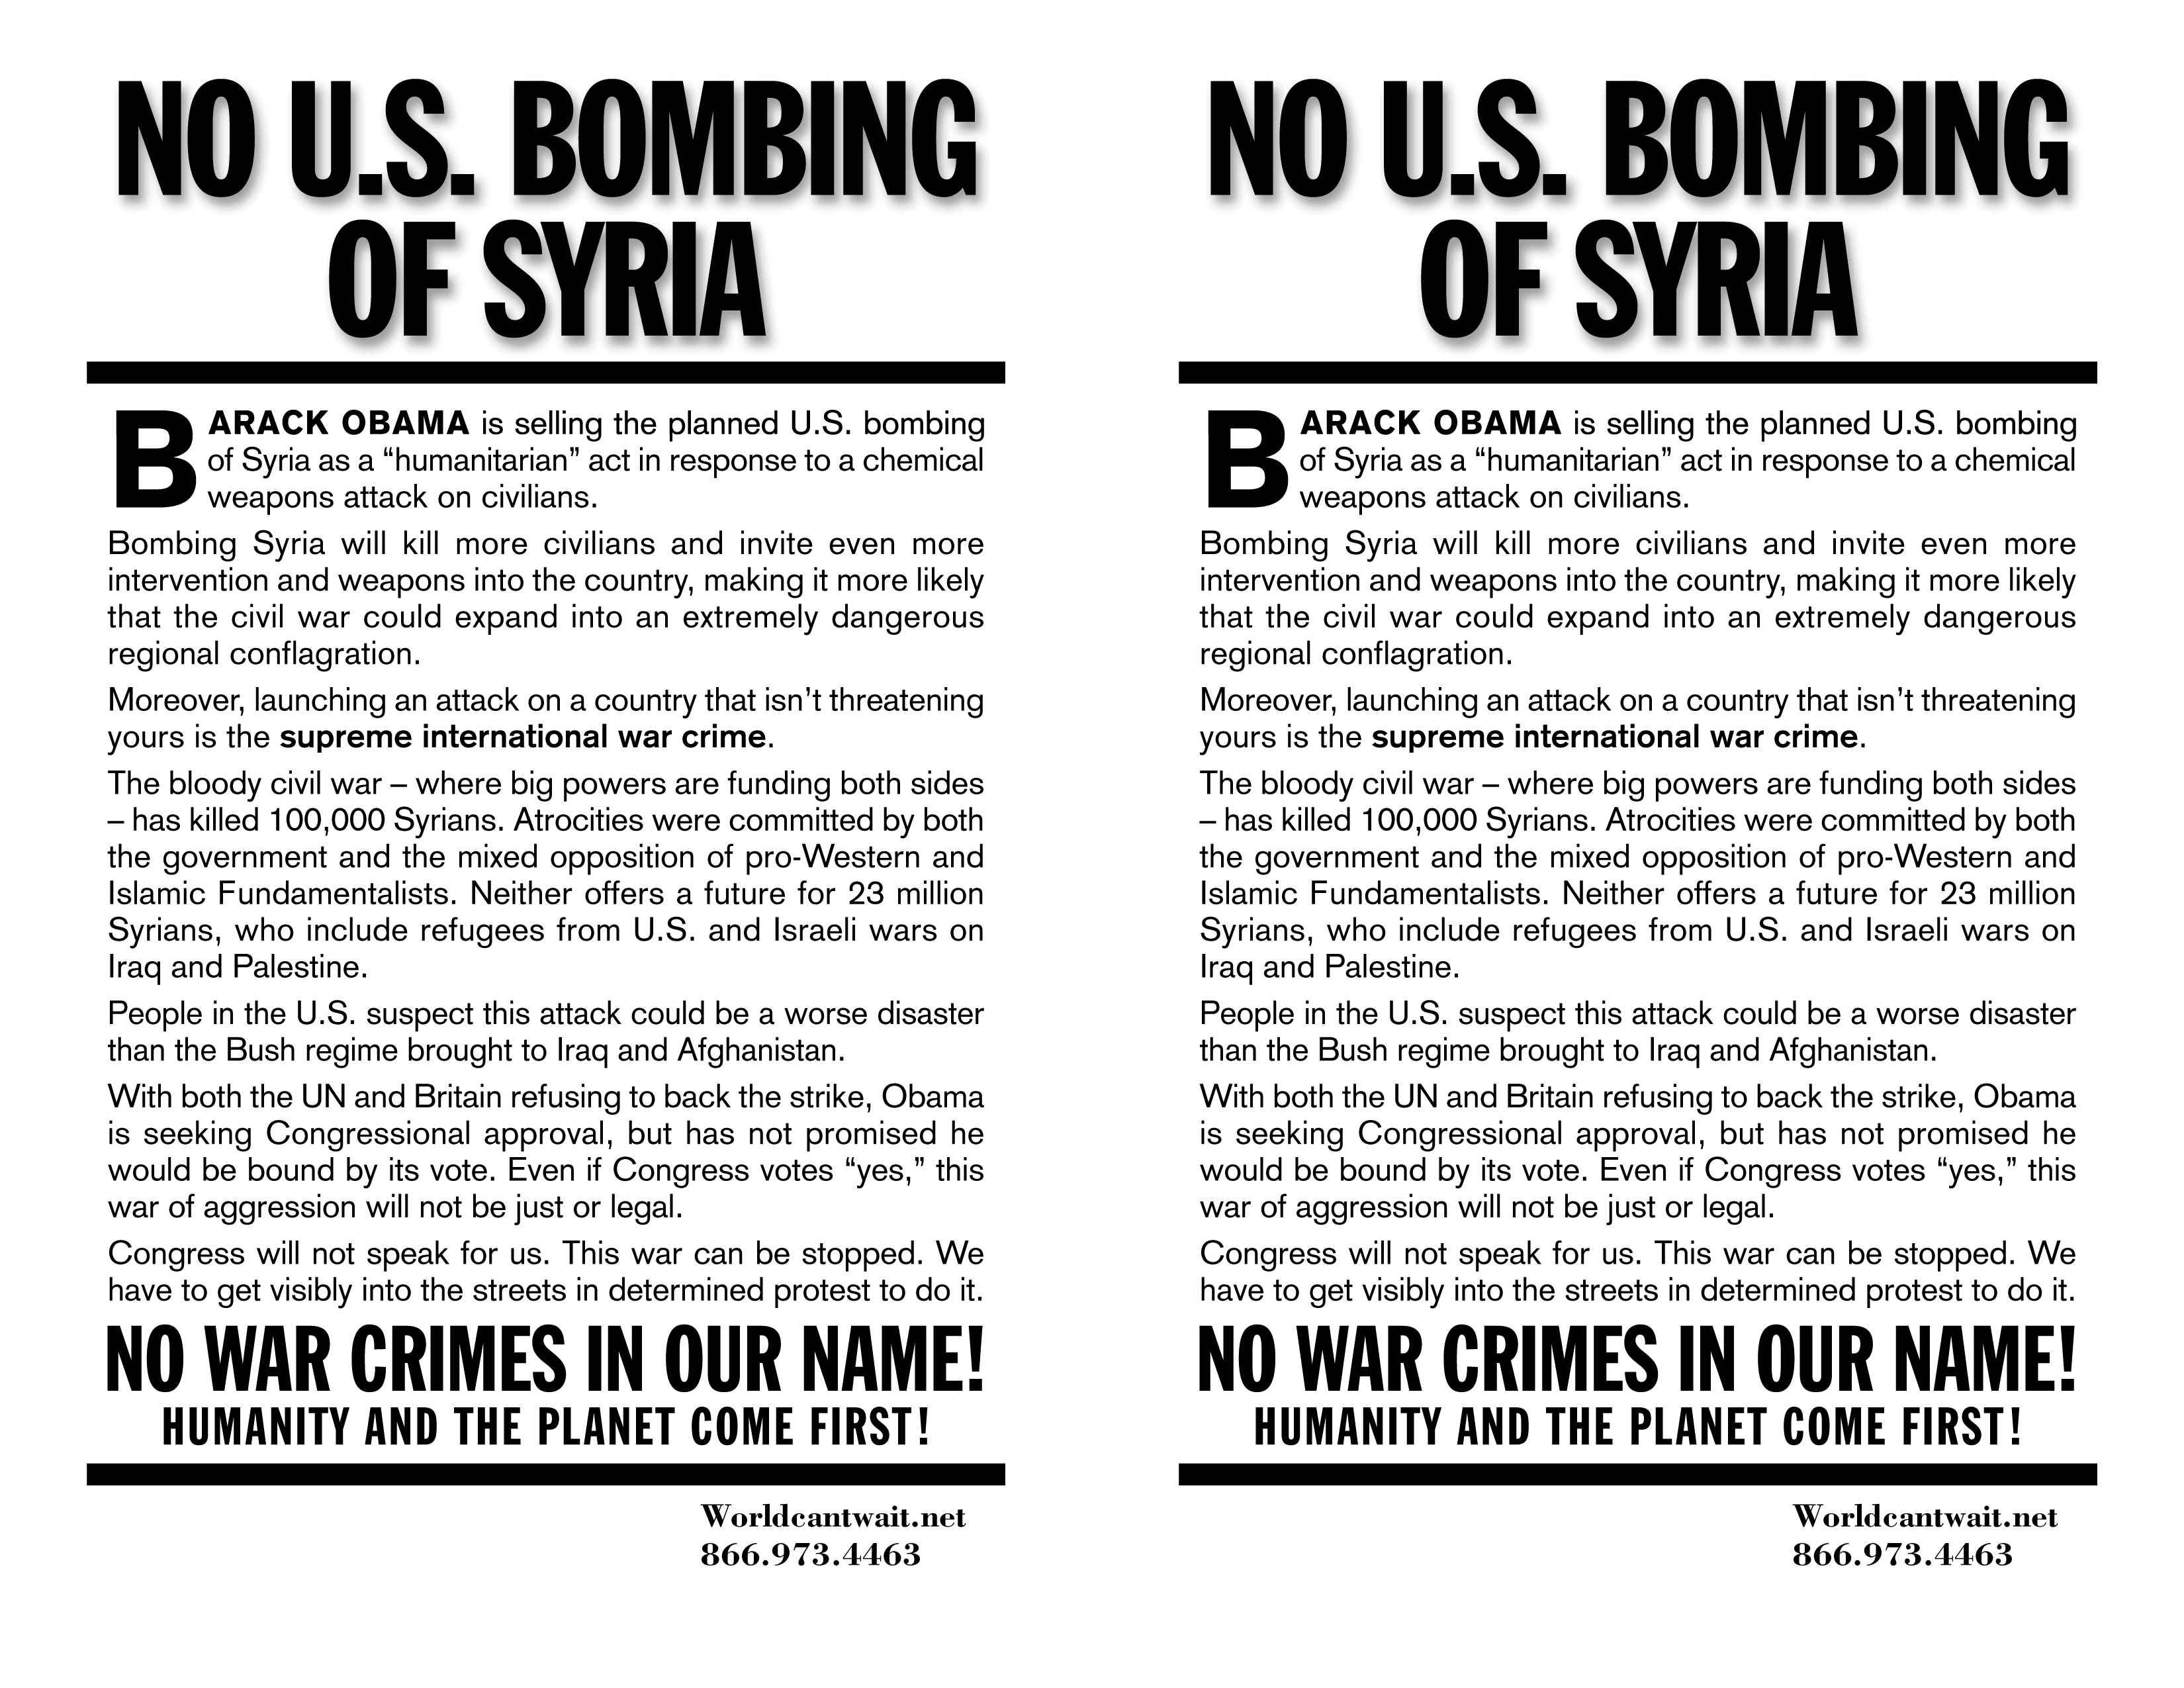 No bombing of Syria protest flier